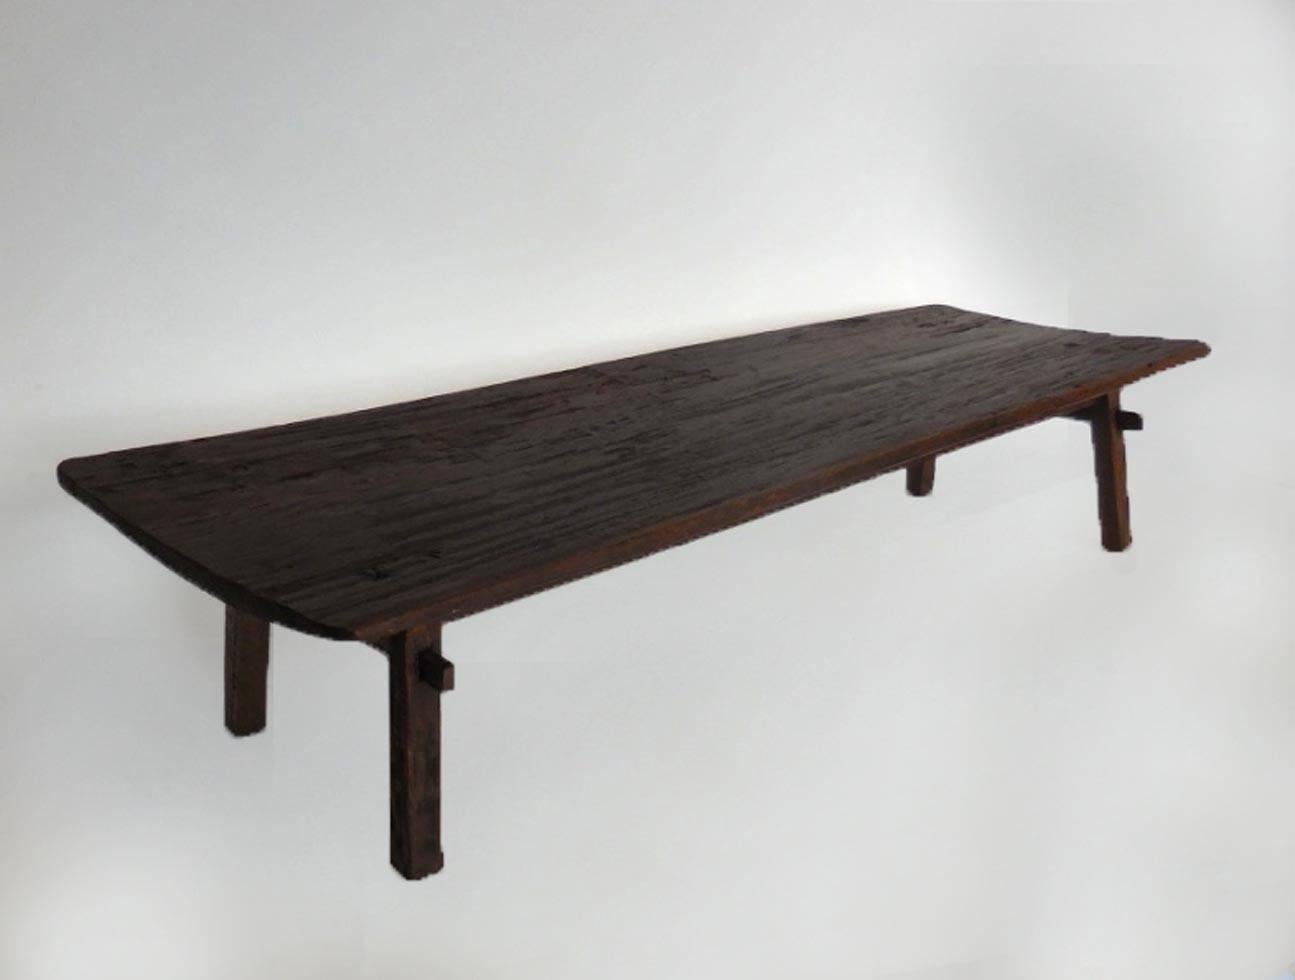 19th century beautiful, dark, rich chocolate color wood antique bed from Nepal. One wide board, stretchers. Great simple, yet modern design. Mortise and tenon construction. Smooth, worn patina throughout. Can be used as a coffee table or bench.